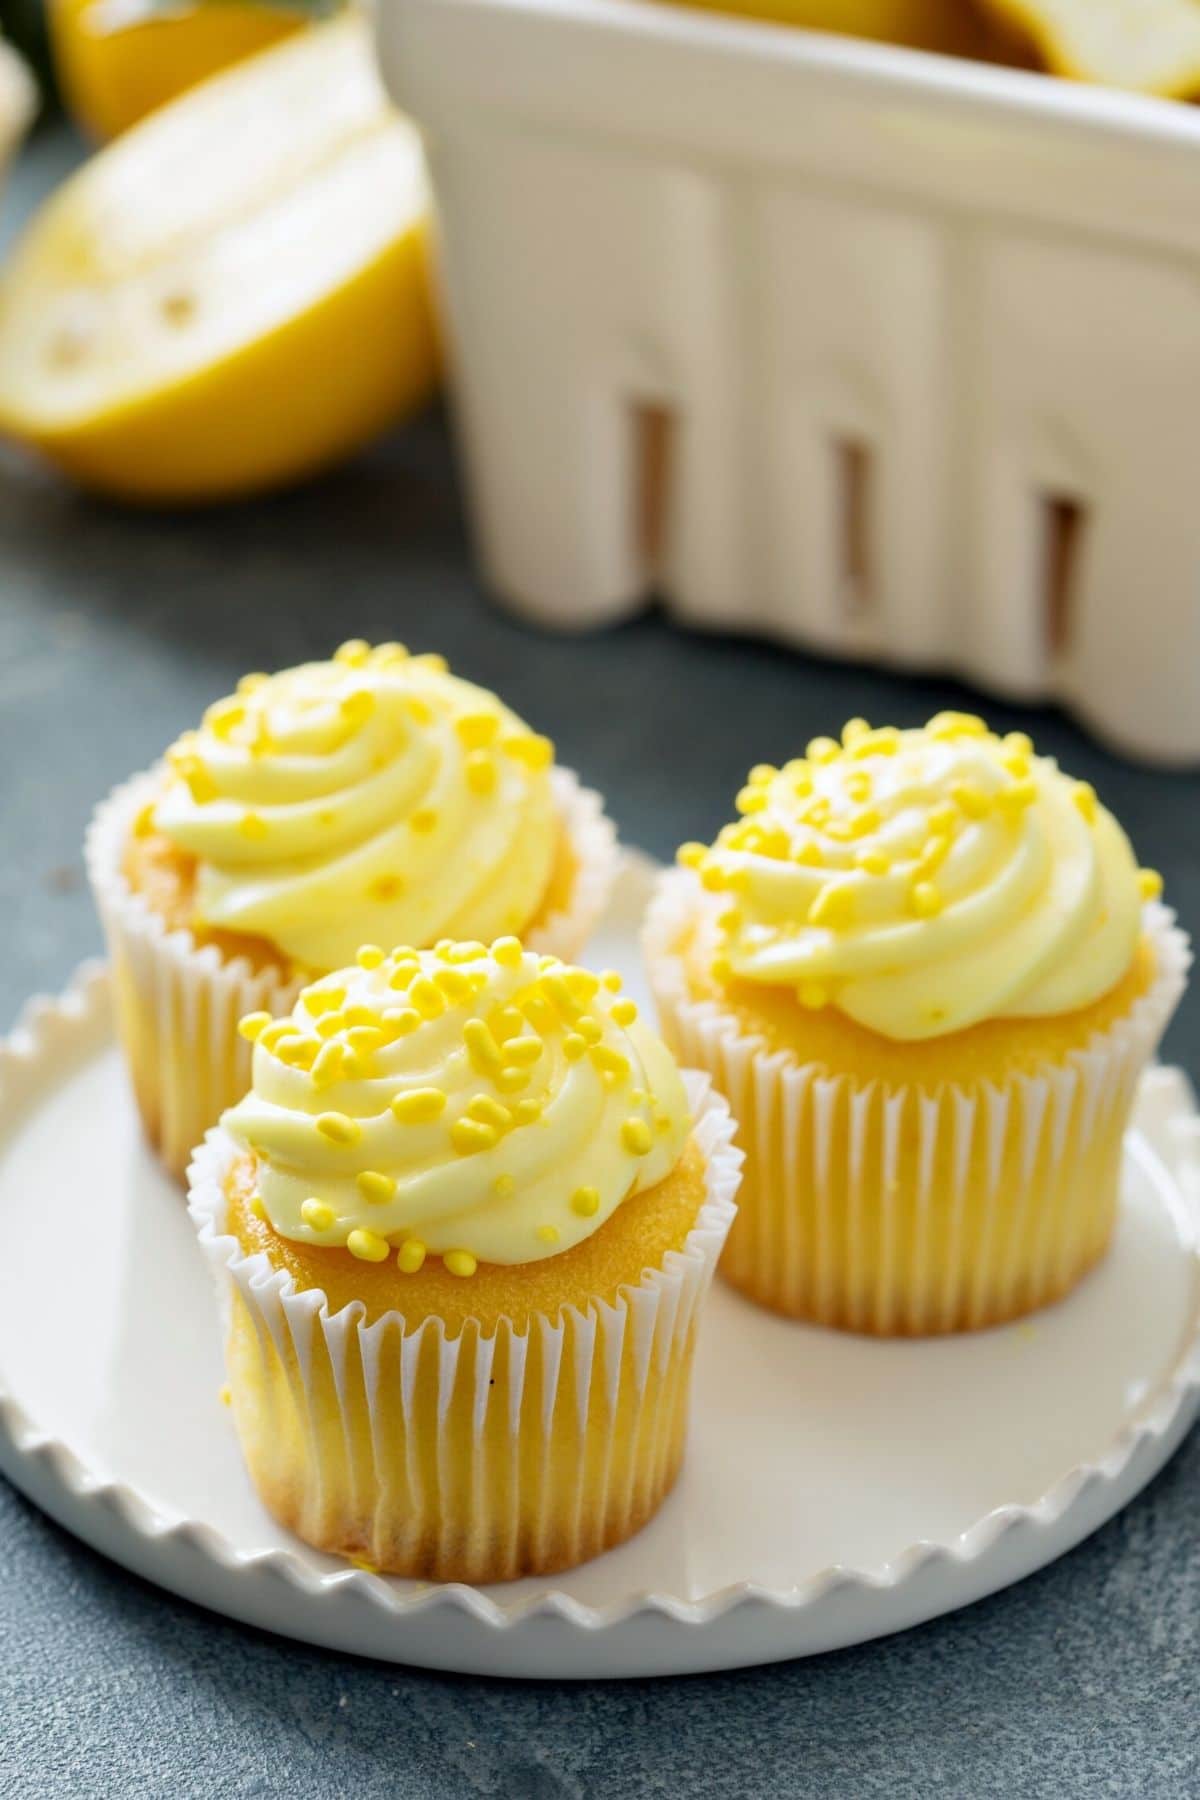 Three lemon cupcakes on a plate. They are frosted and topped with lemon sprinkles.